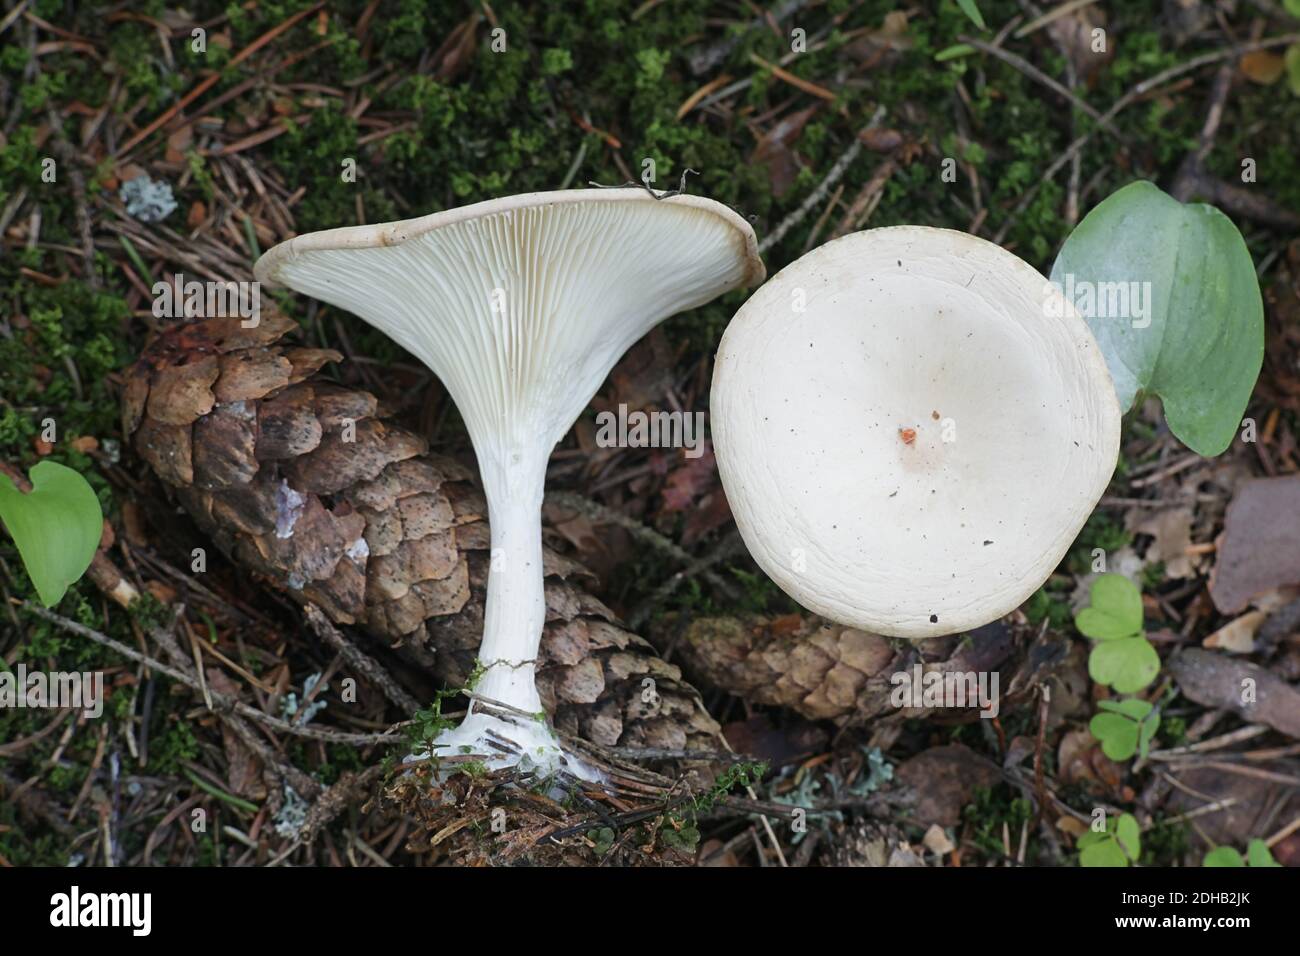 Infundibulicybe gibba, also called Clitocybe gibba, known as common funnel, wild mushroom from Finland Stock Photo